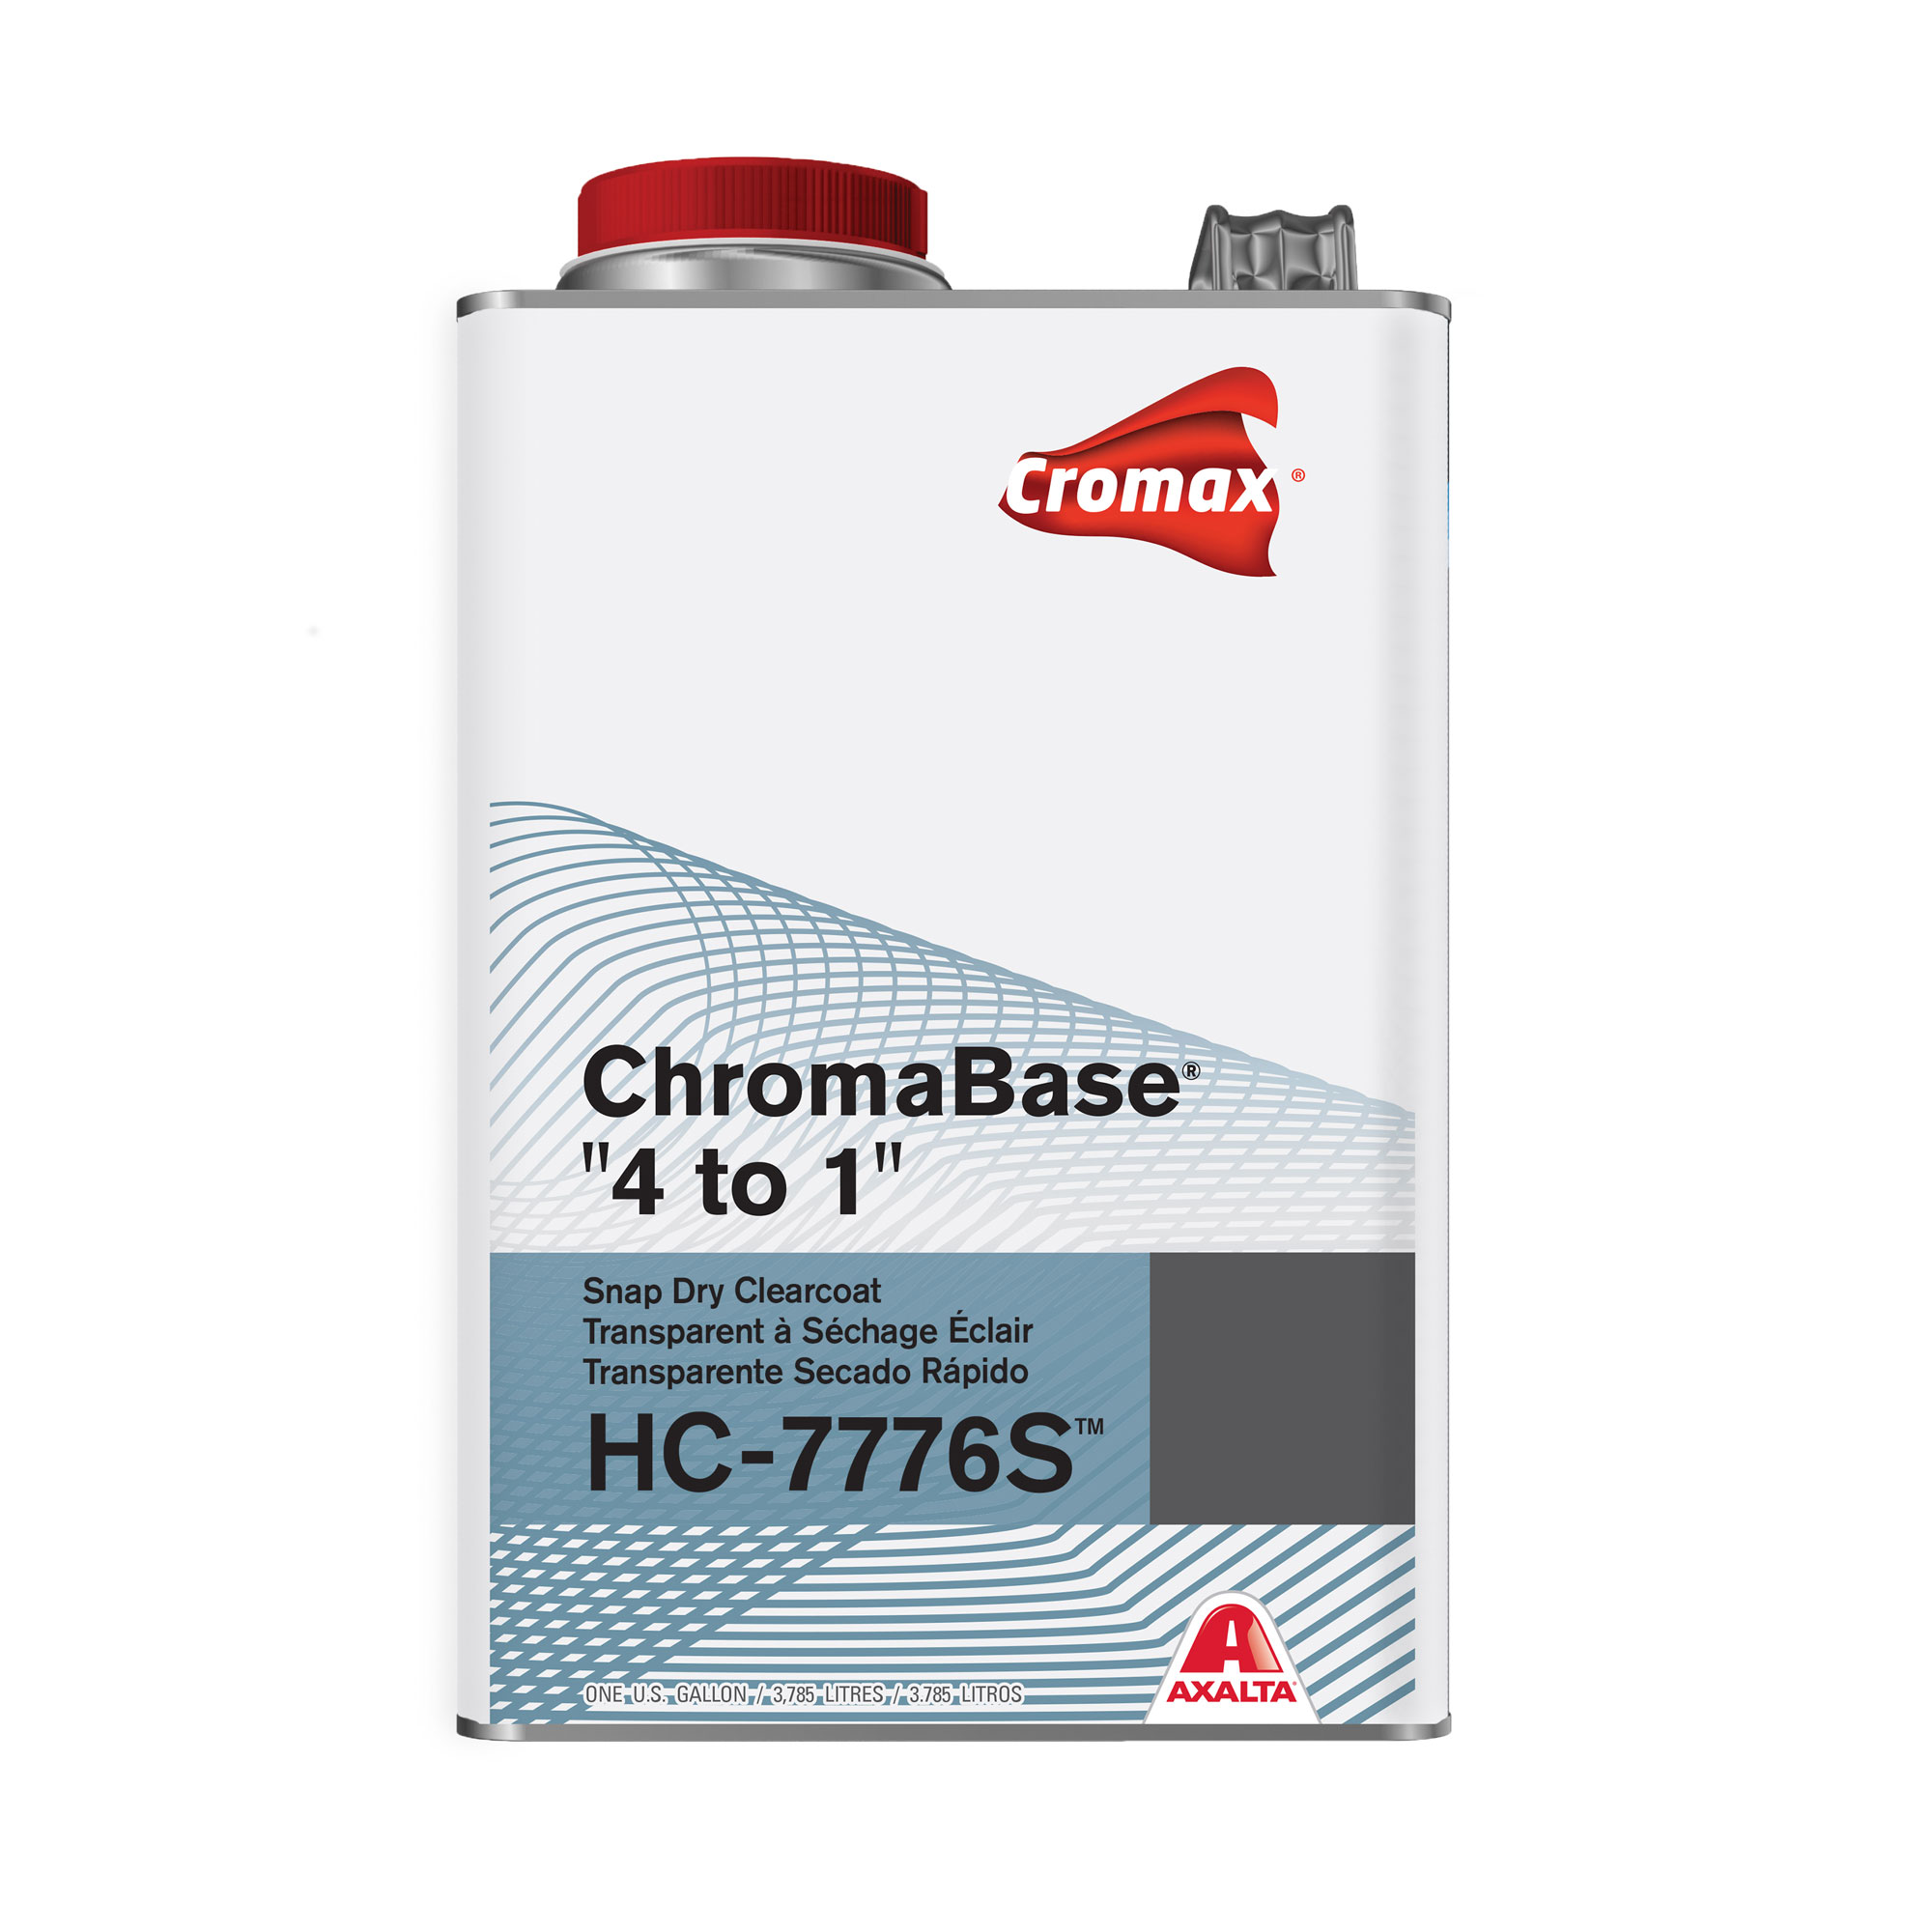 DealerShop - Chromabase 4 to 1 Snap Dry Clearcoat - HC-7776S